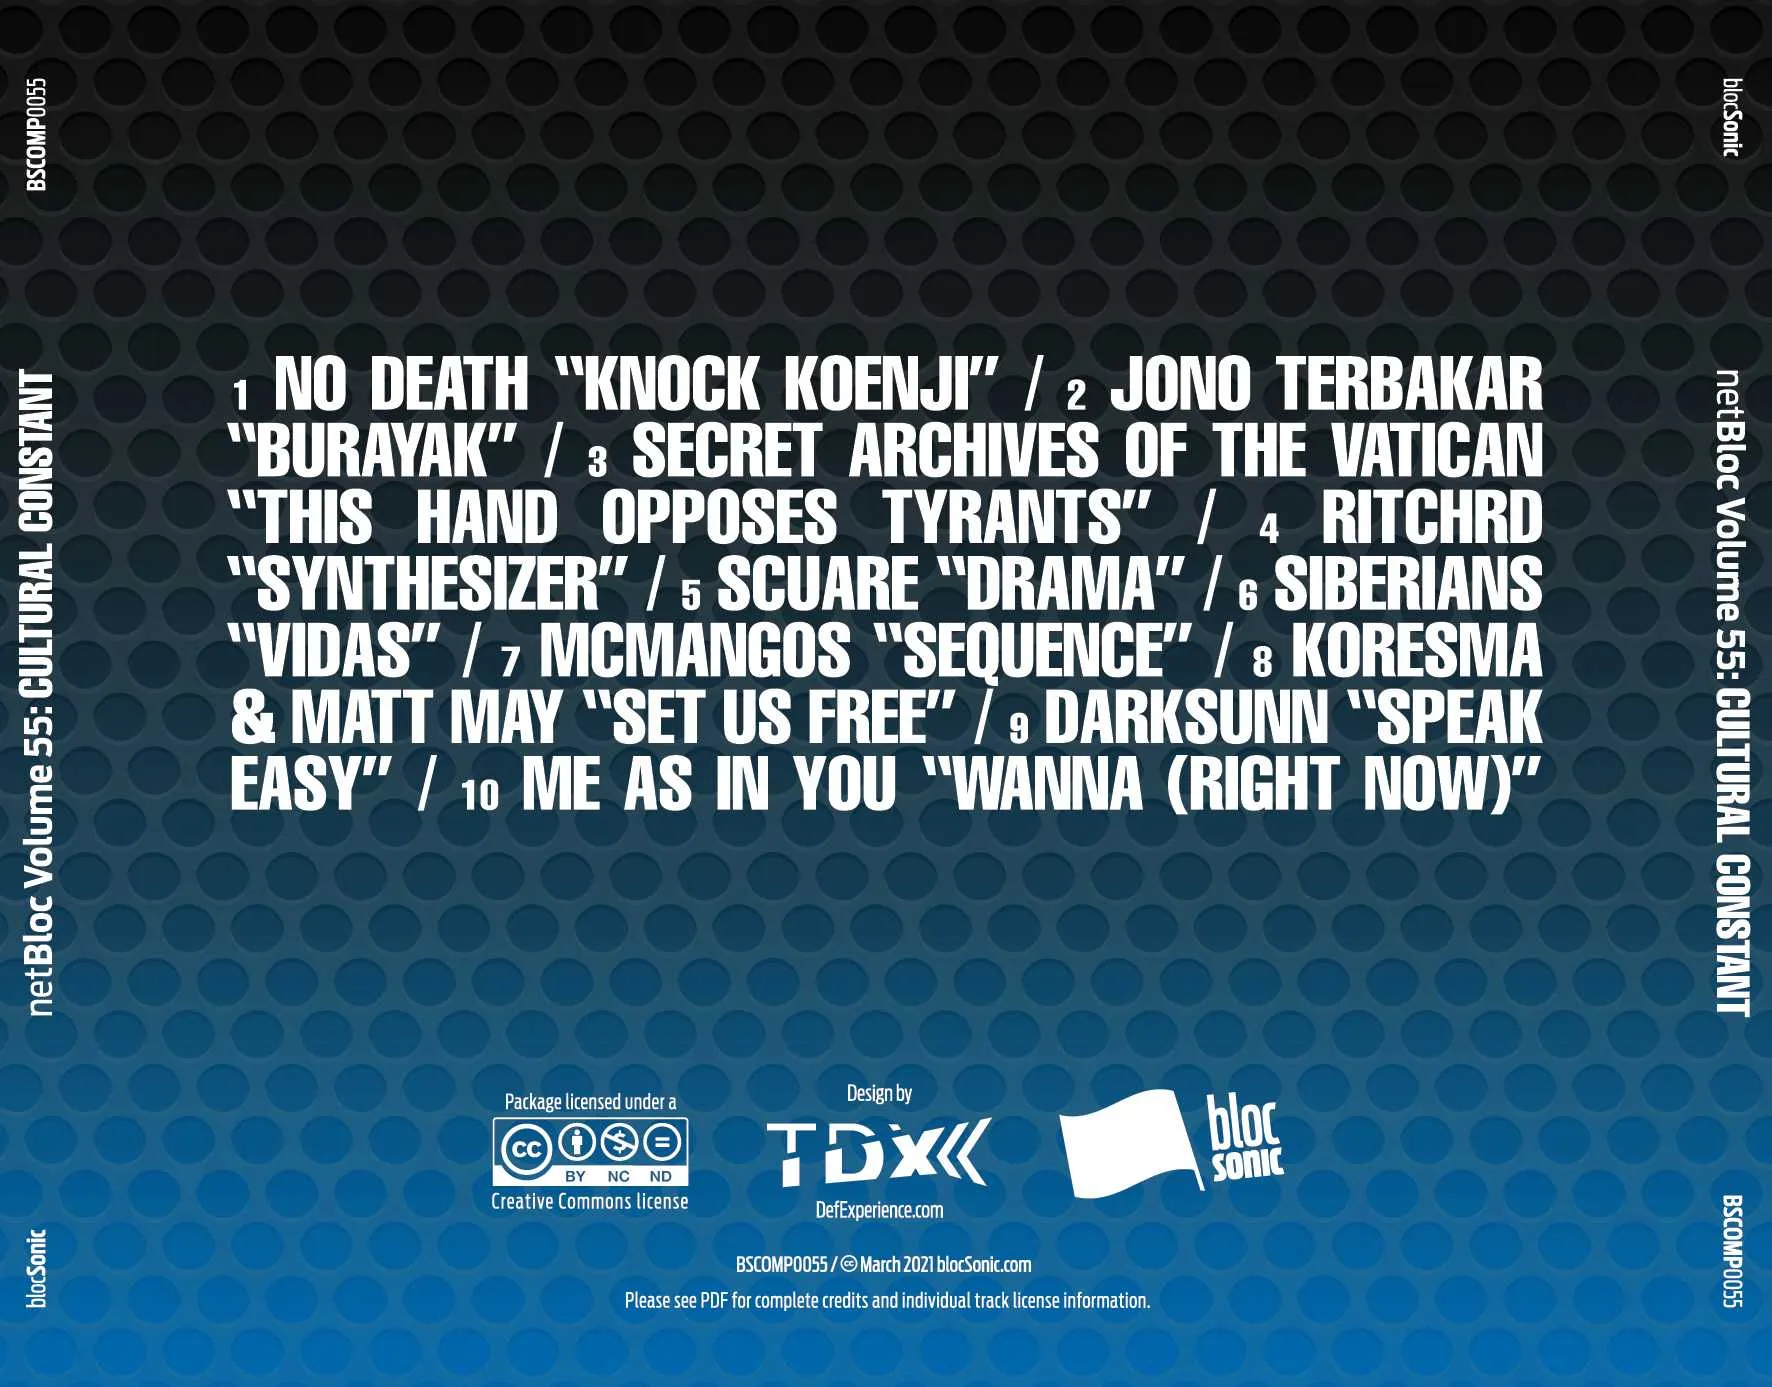 Album traycard for “netBloc Vol. 55: Cultural Constant” by Various Artists